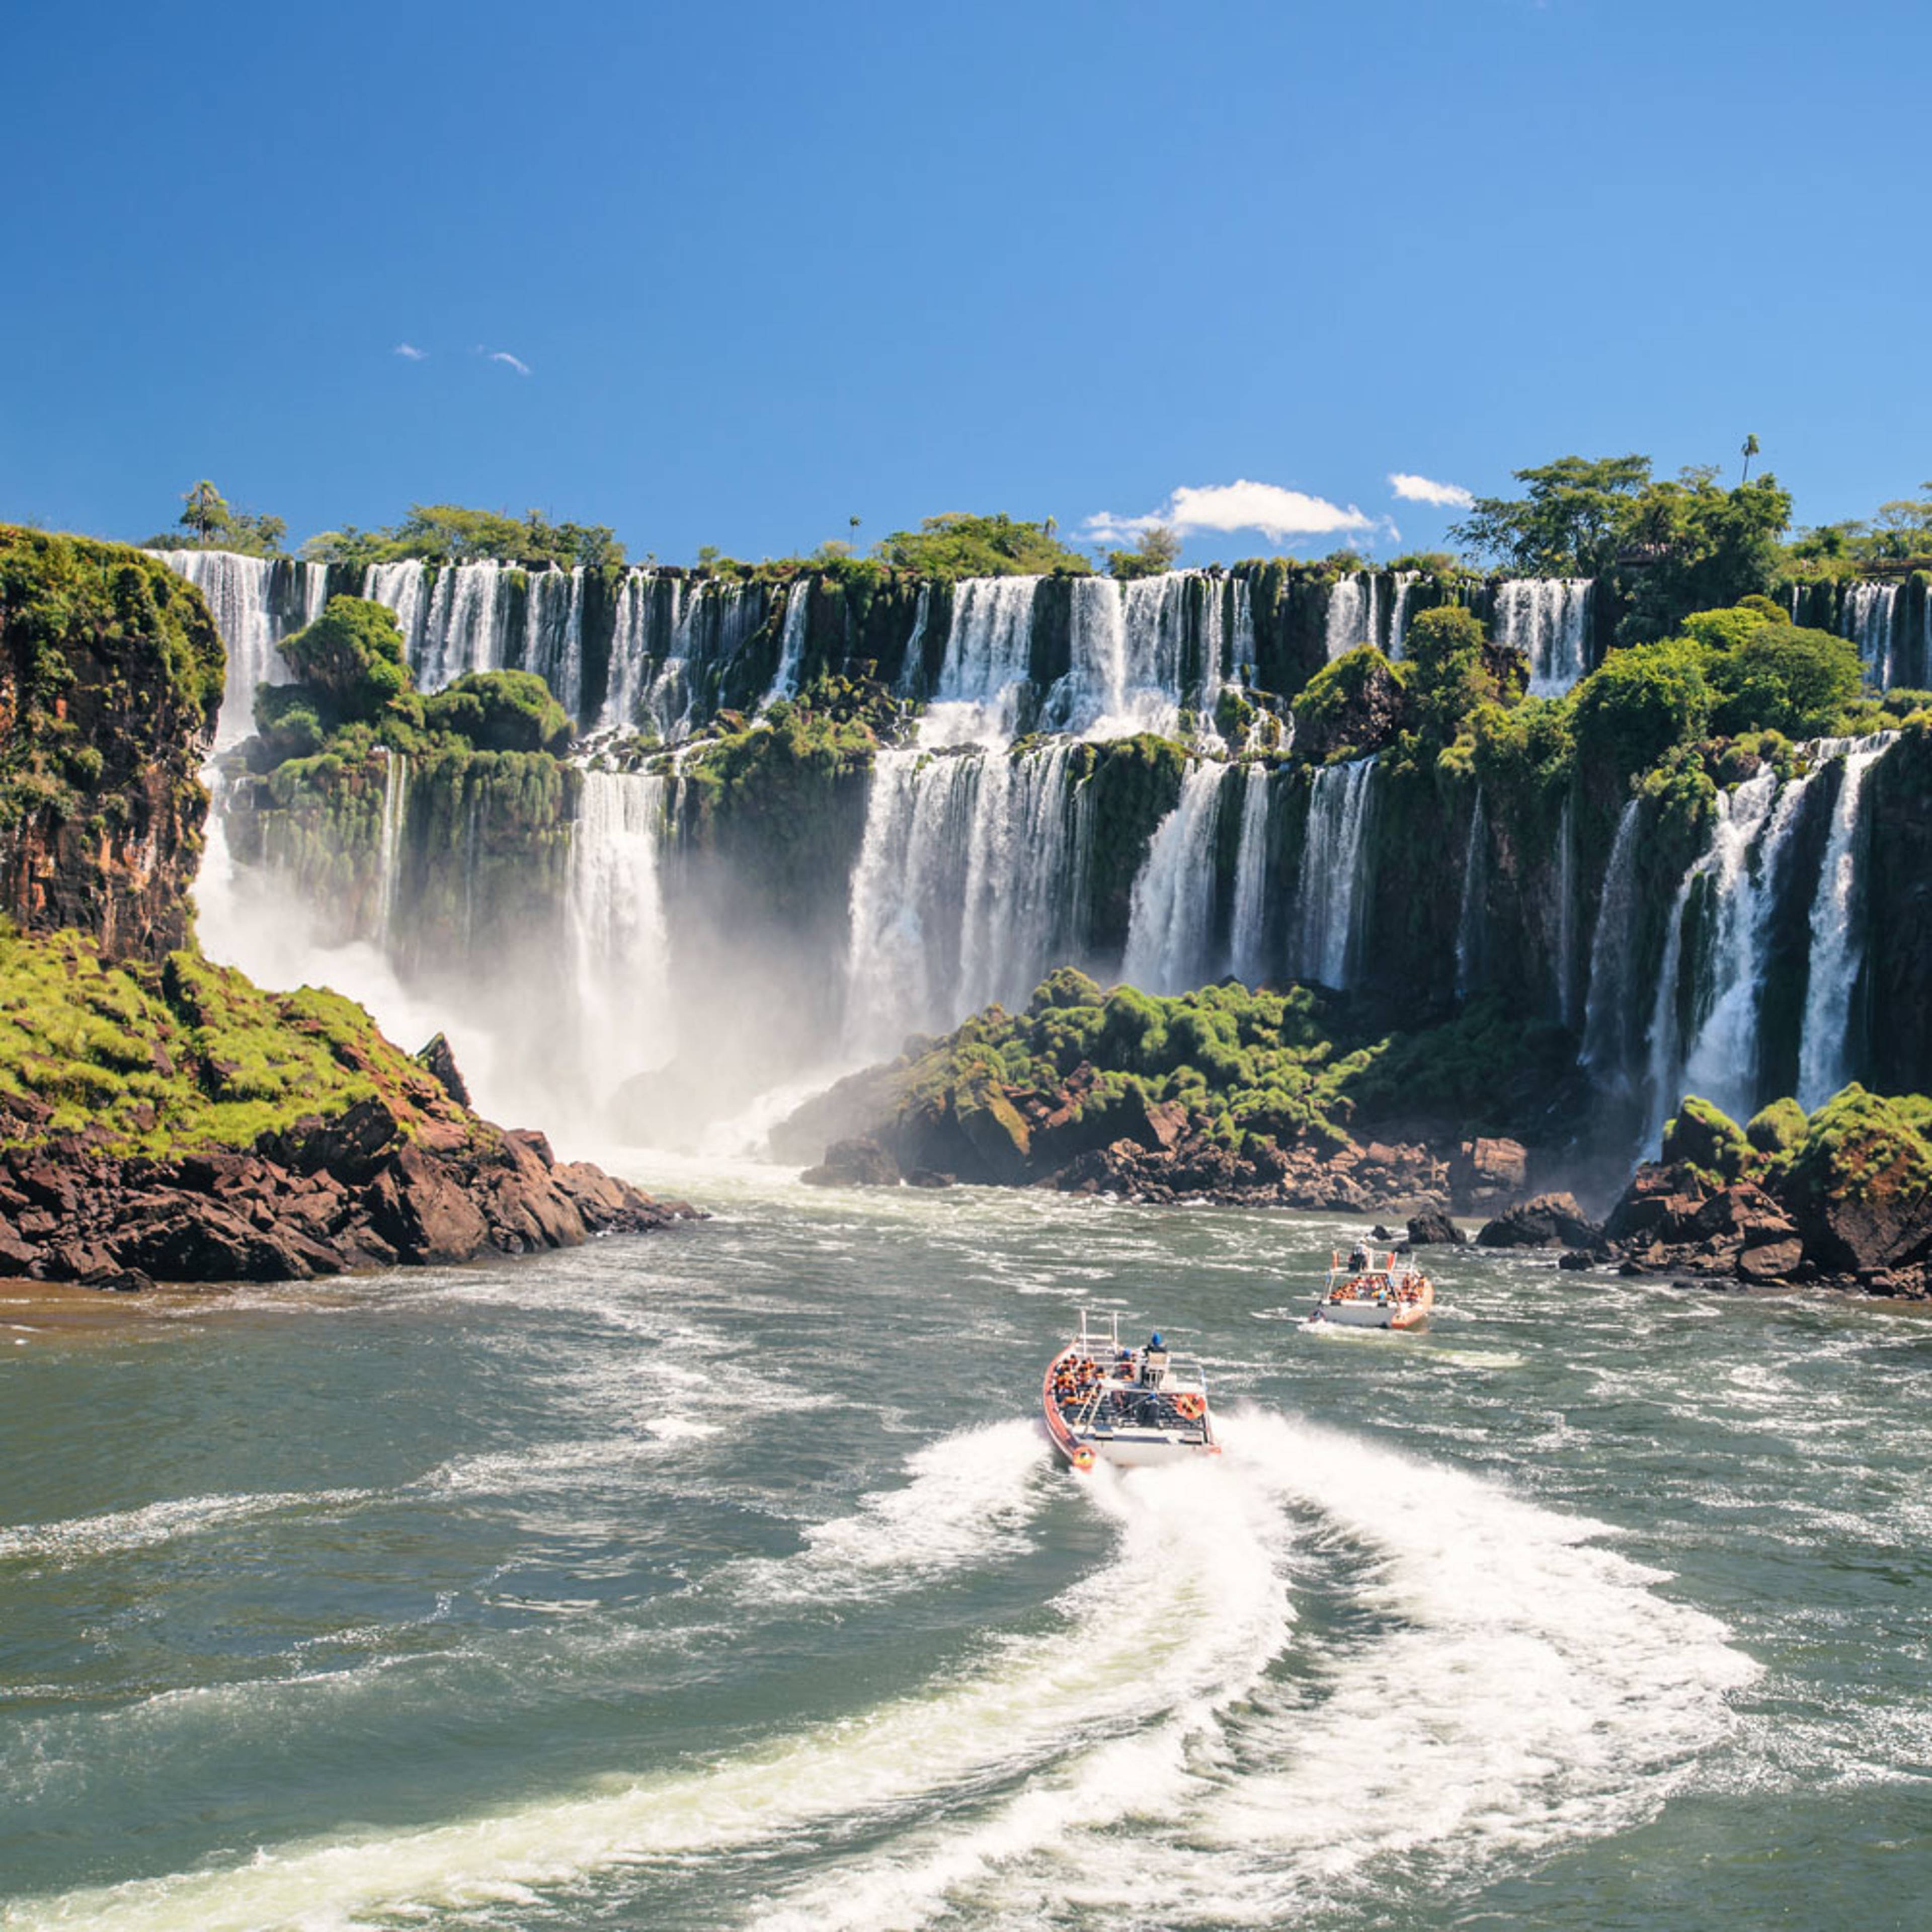 Design your perfect rainforests tour with a local expert in Argentina